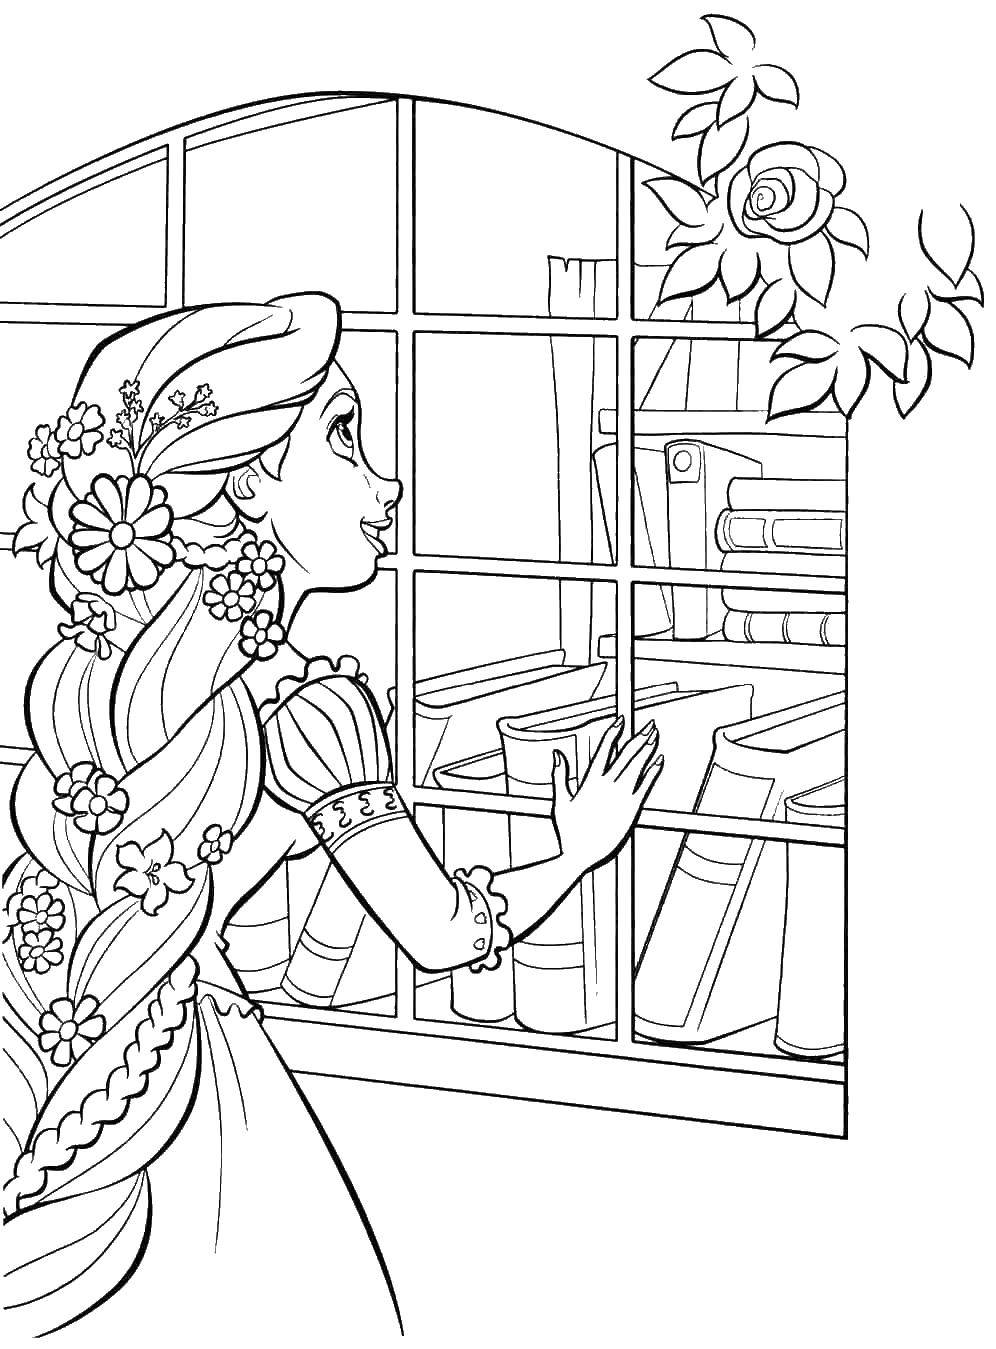 Coloring Rapunzel looks Vetrino. Category coloring pages Rapunzel tangled. Tags:  Rapunzel , the Prince.